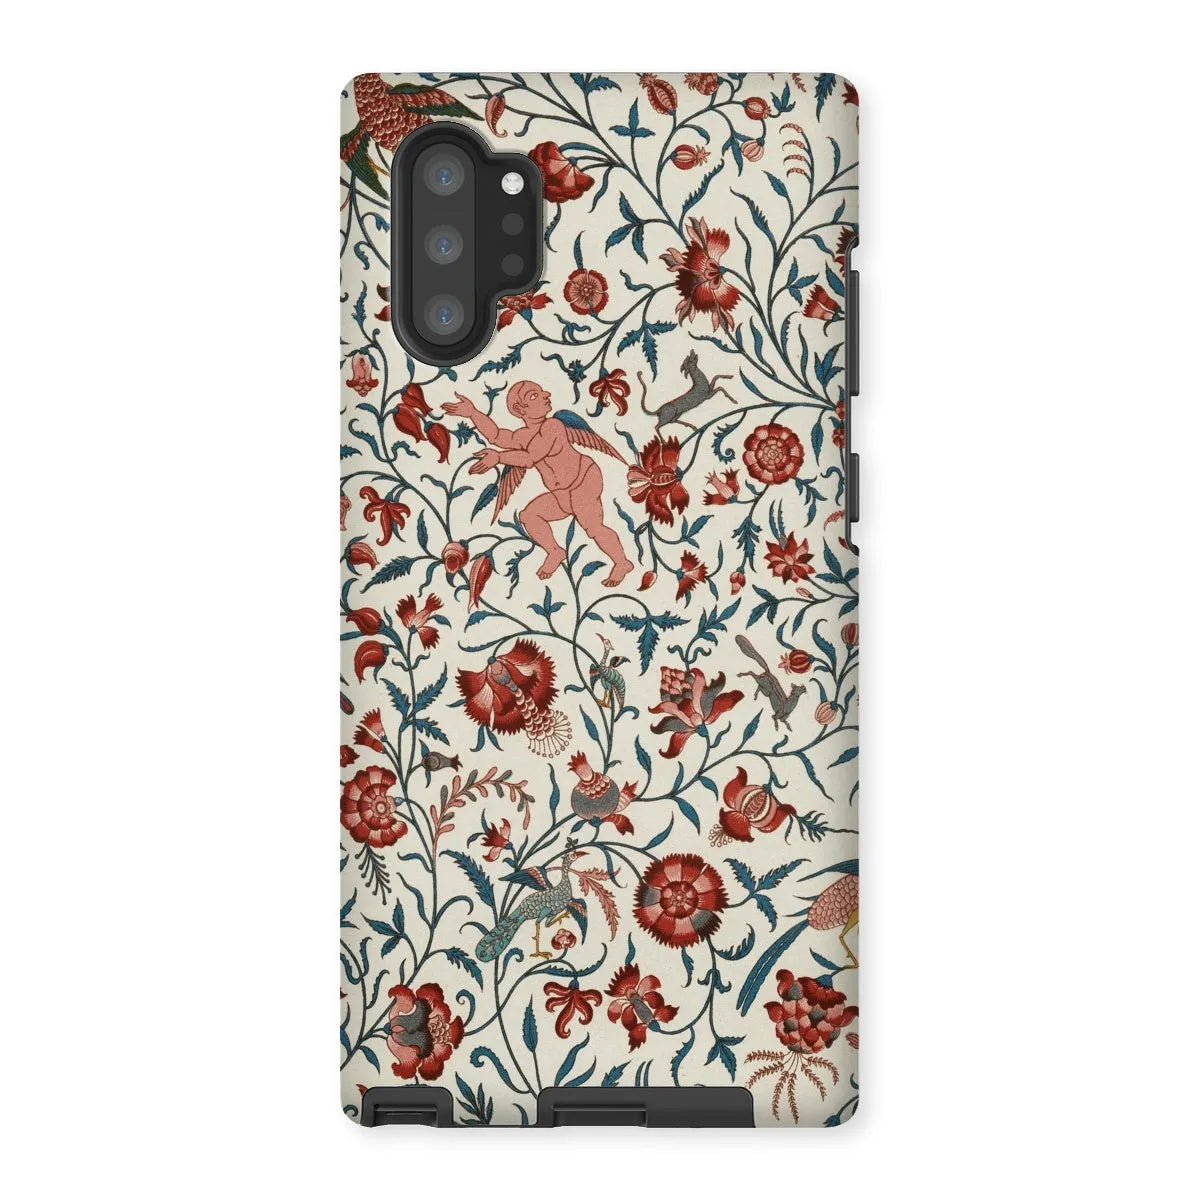 Persian Pattern From L’ornement Polychrome By Auguste Racinet Tough Phone Case - Samsung Galaxy Note 10p / Matte